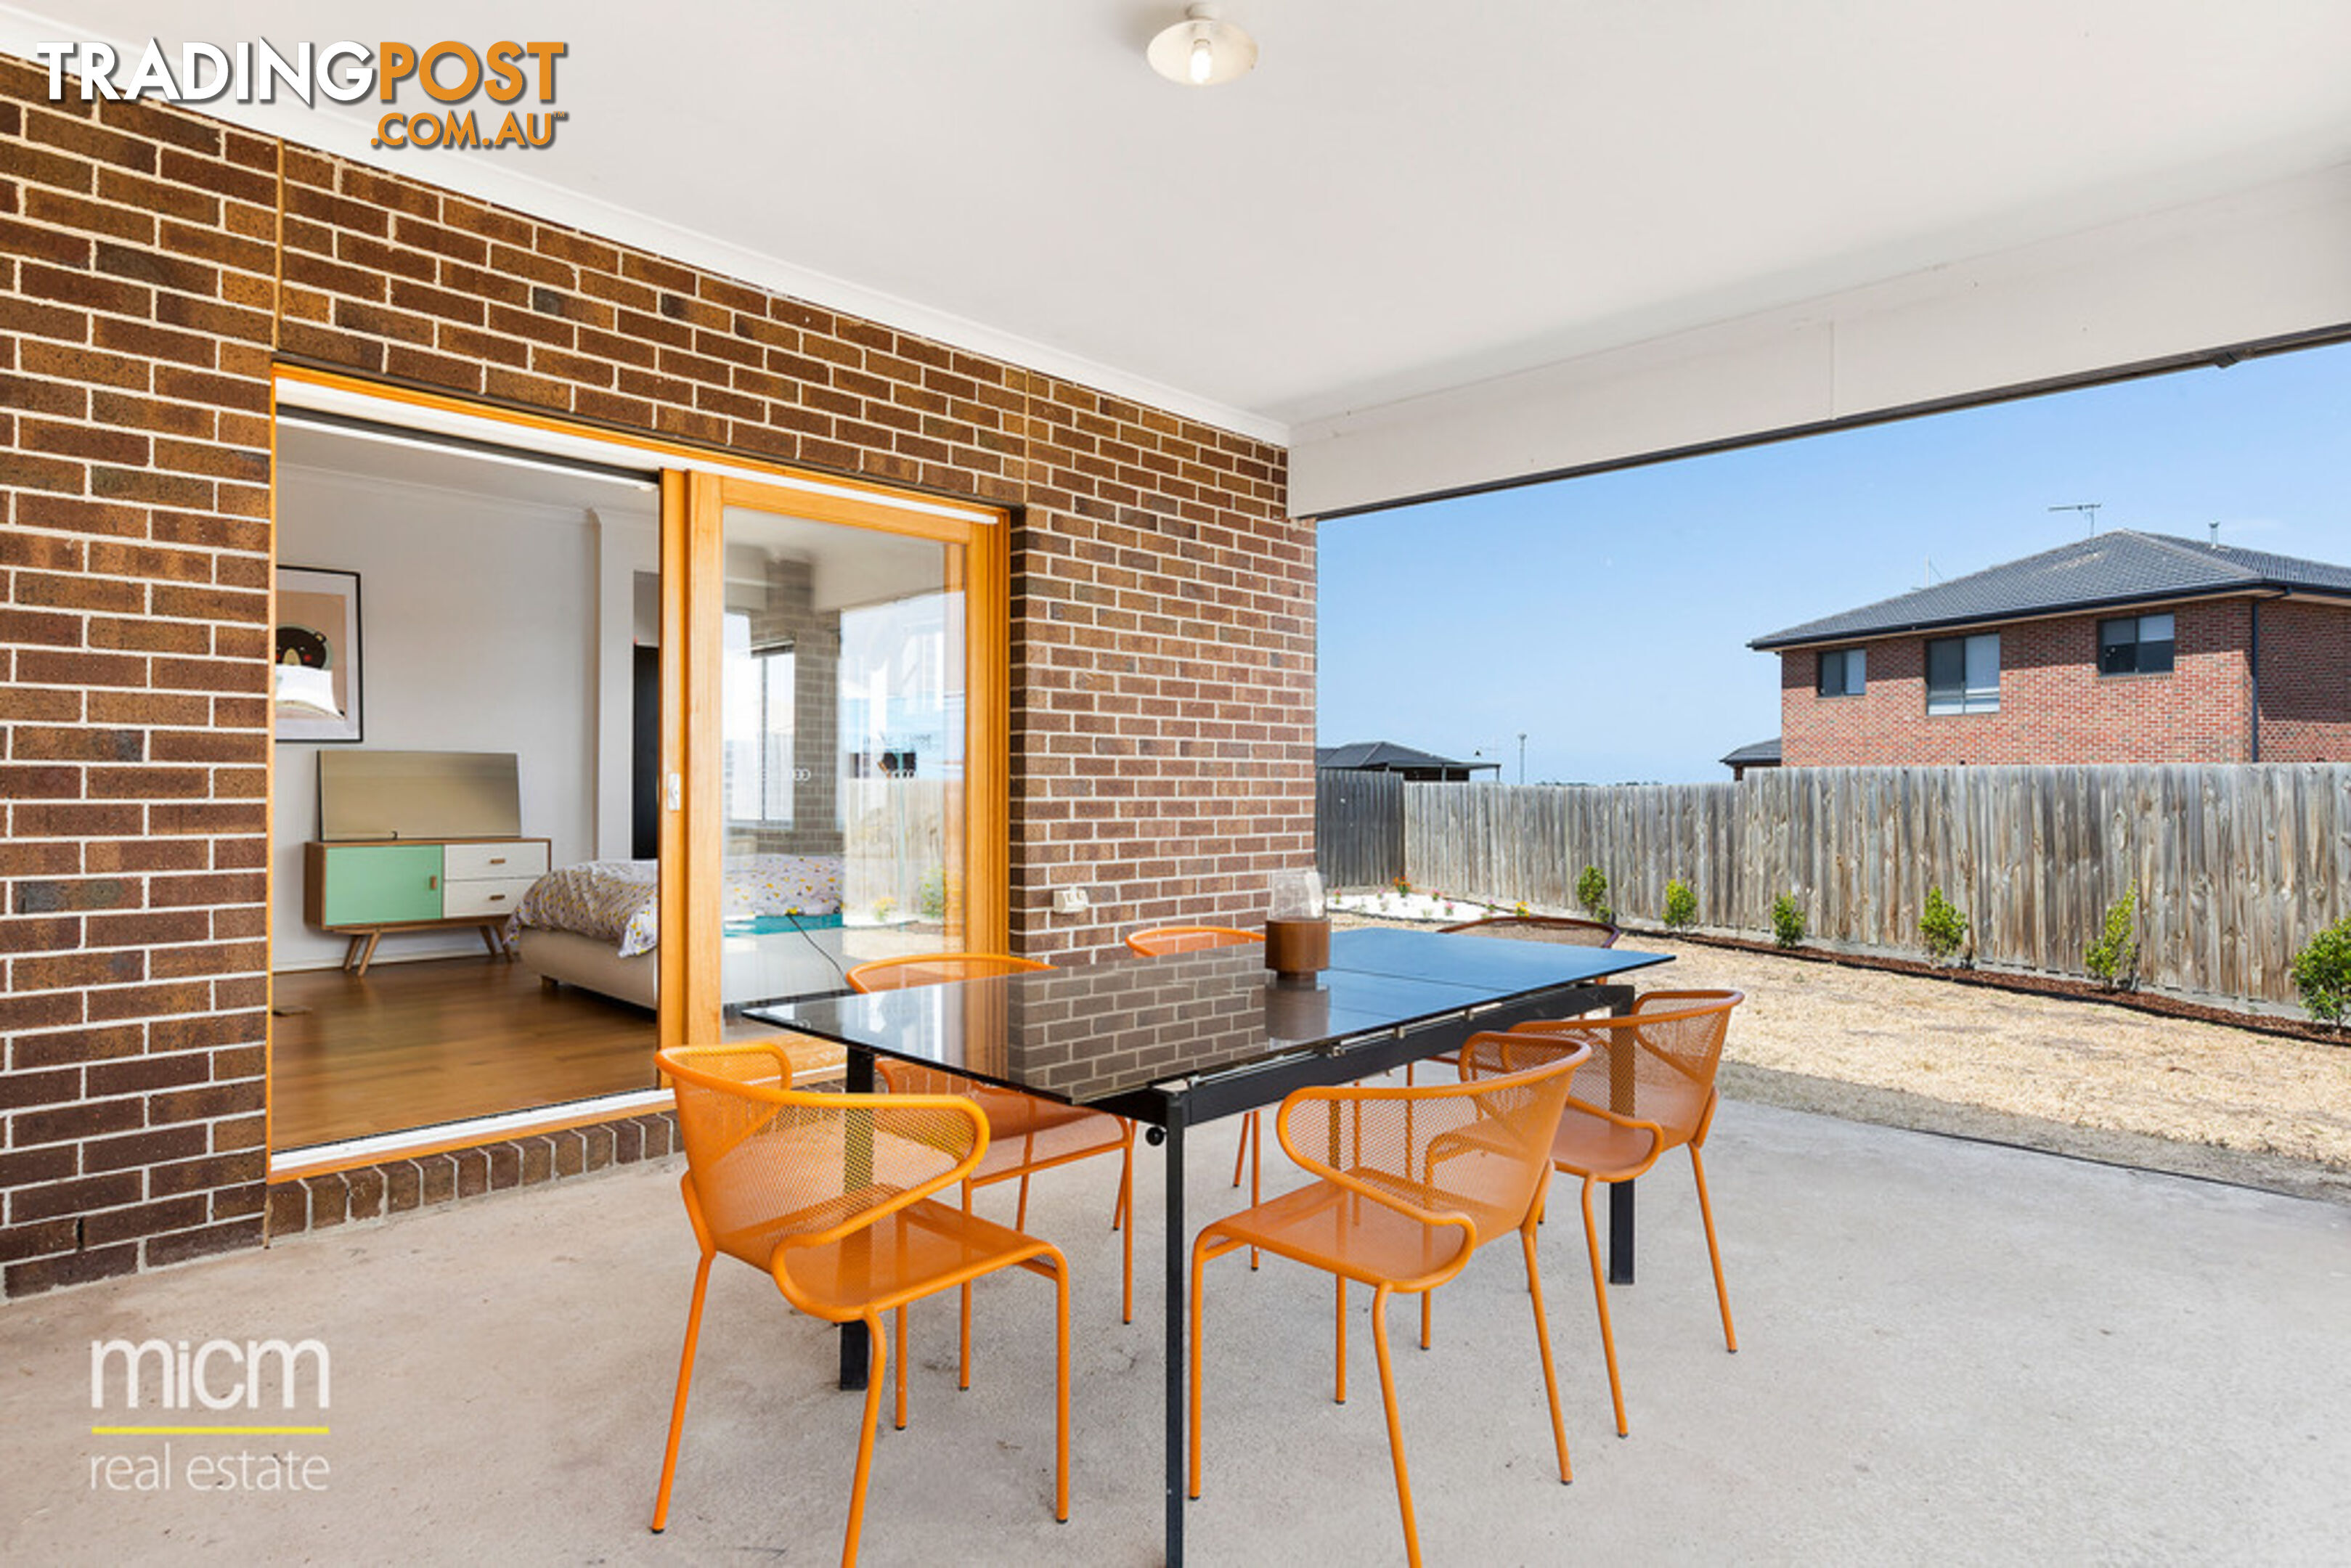 5 Willowherb Way POINT COOK VIC 3030